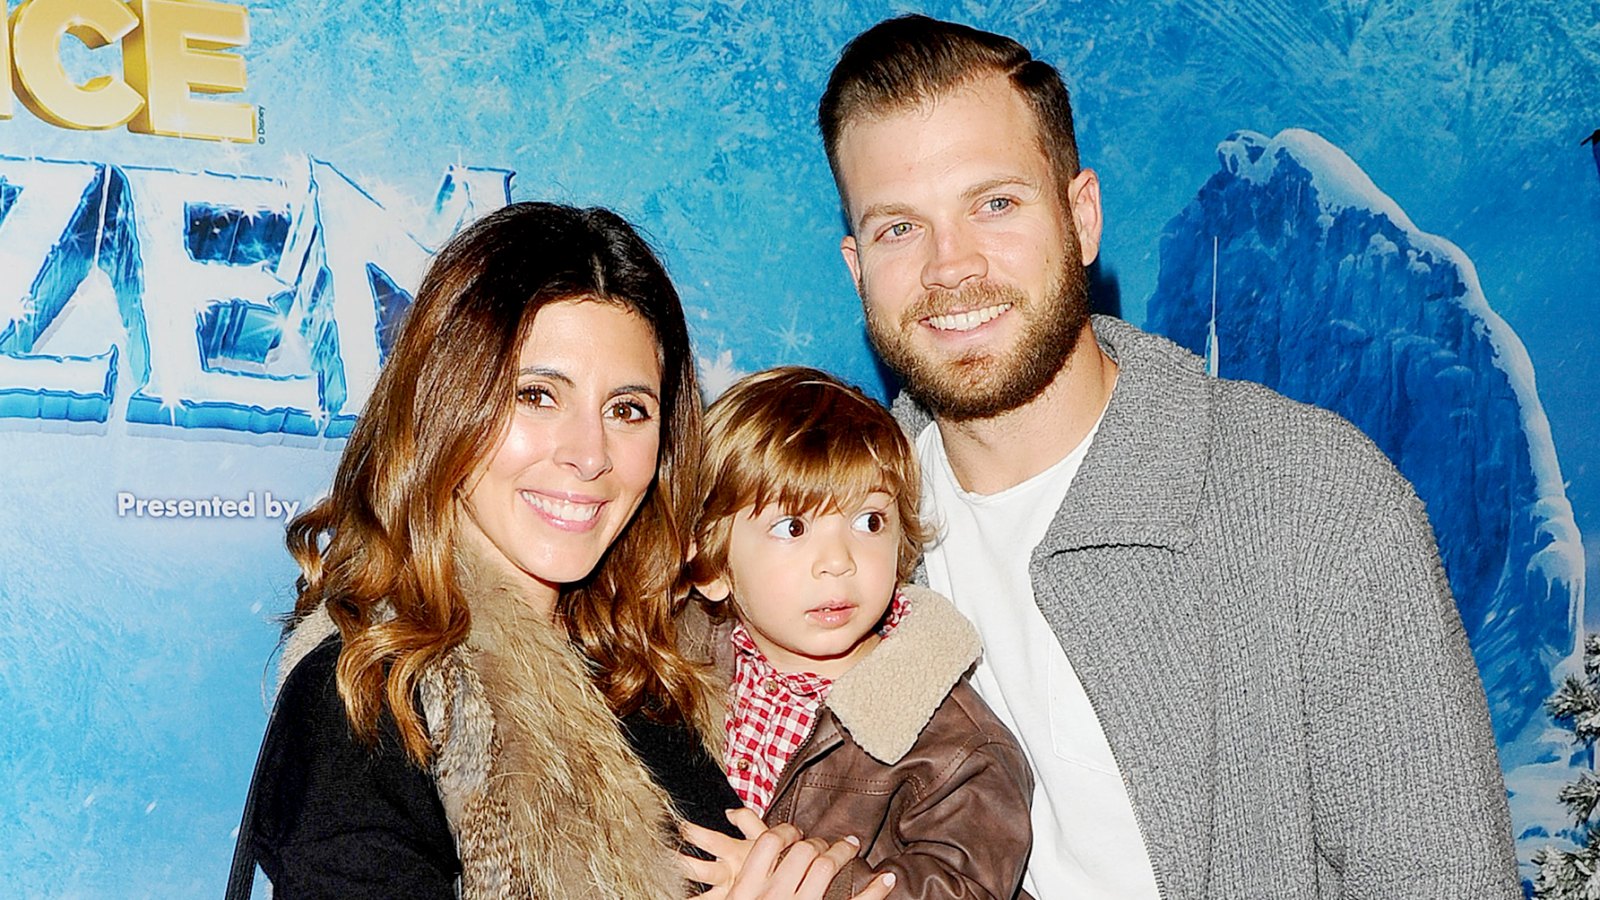 Cutter Dykstra with his wife Jamie Lynn Sigler and their son at an event